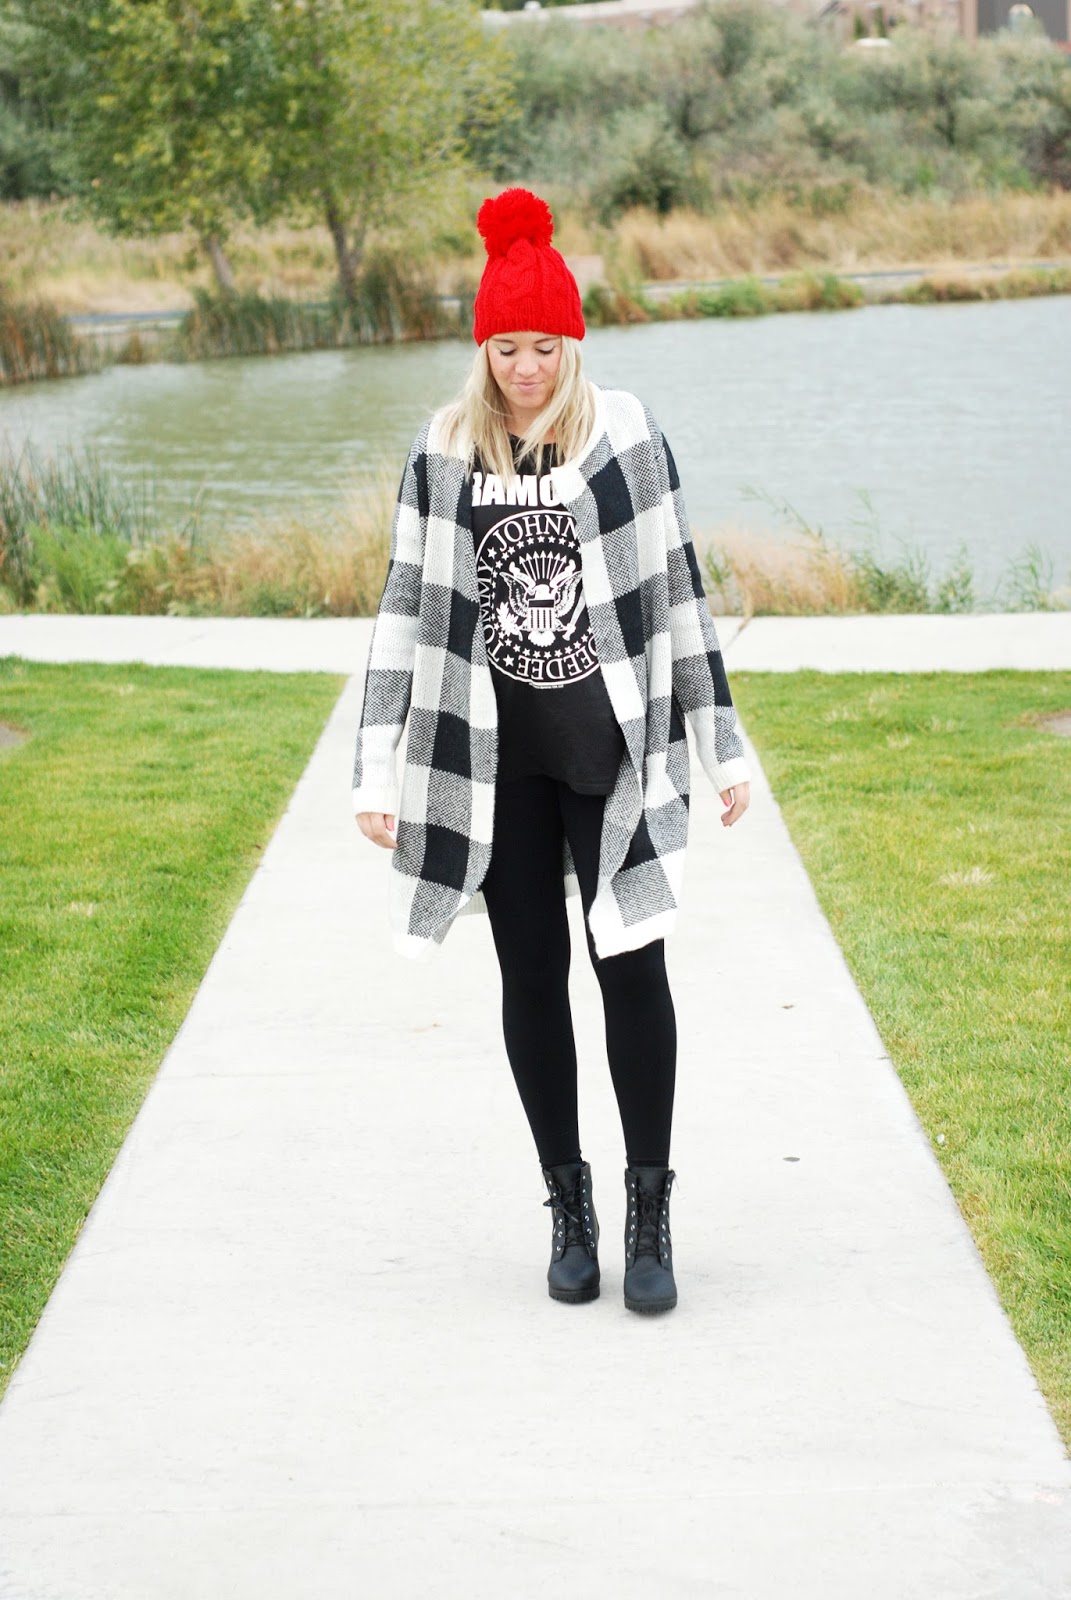 ALMOST FALL FEATURING LONG TALL SALLY & #WIWT LINK UP!